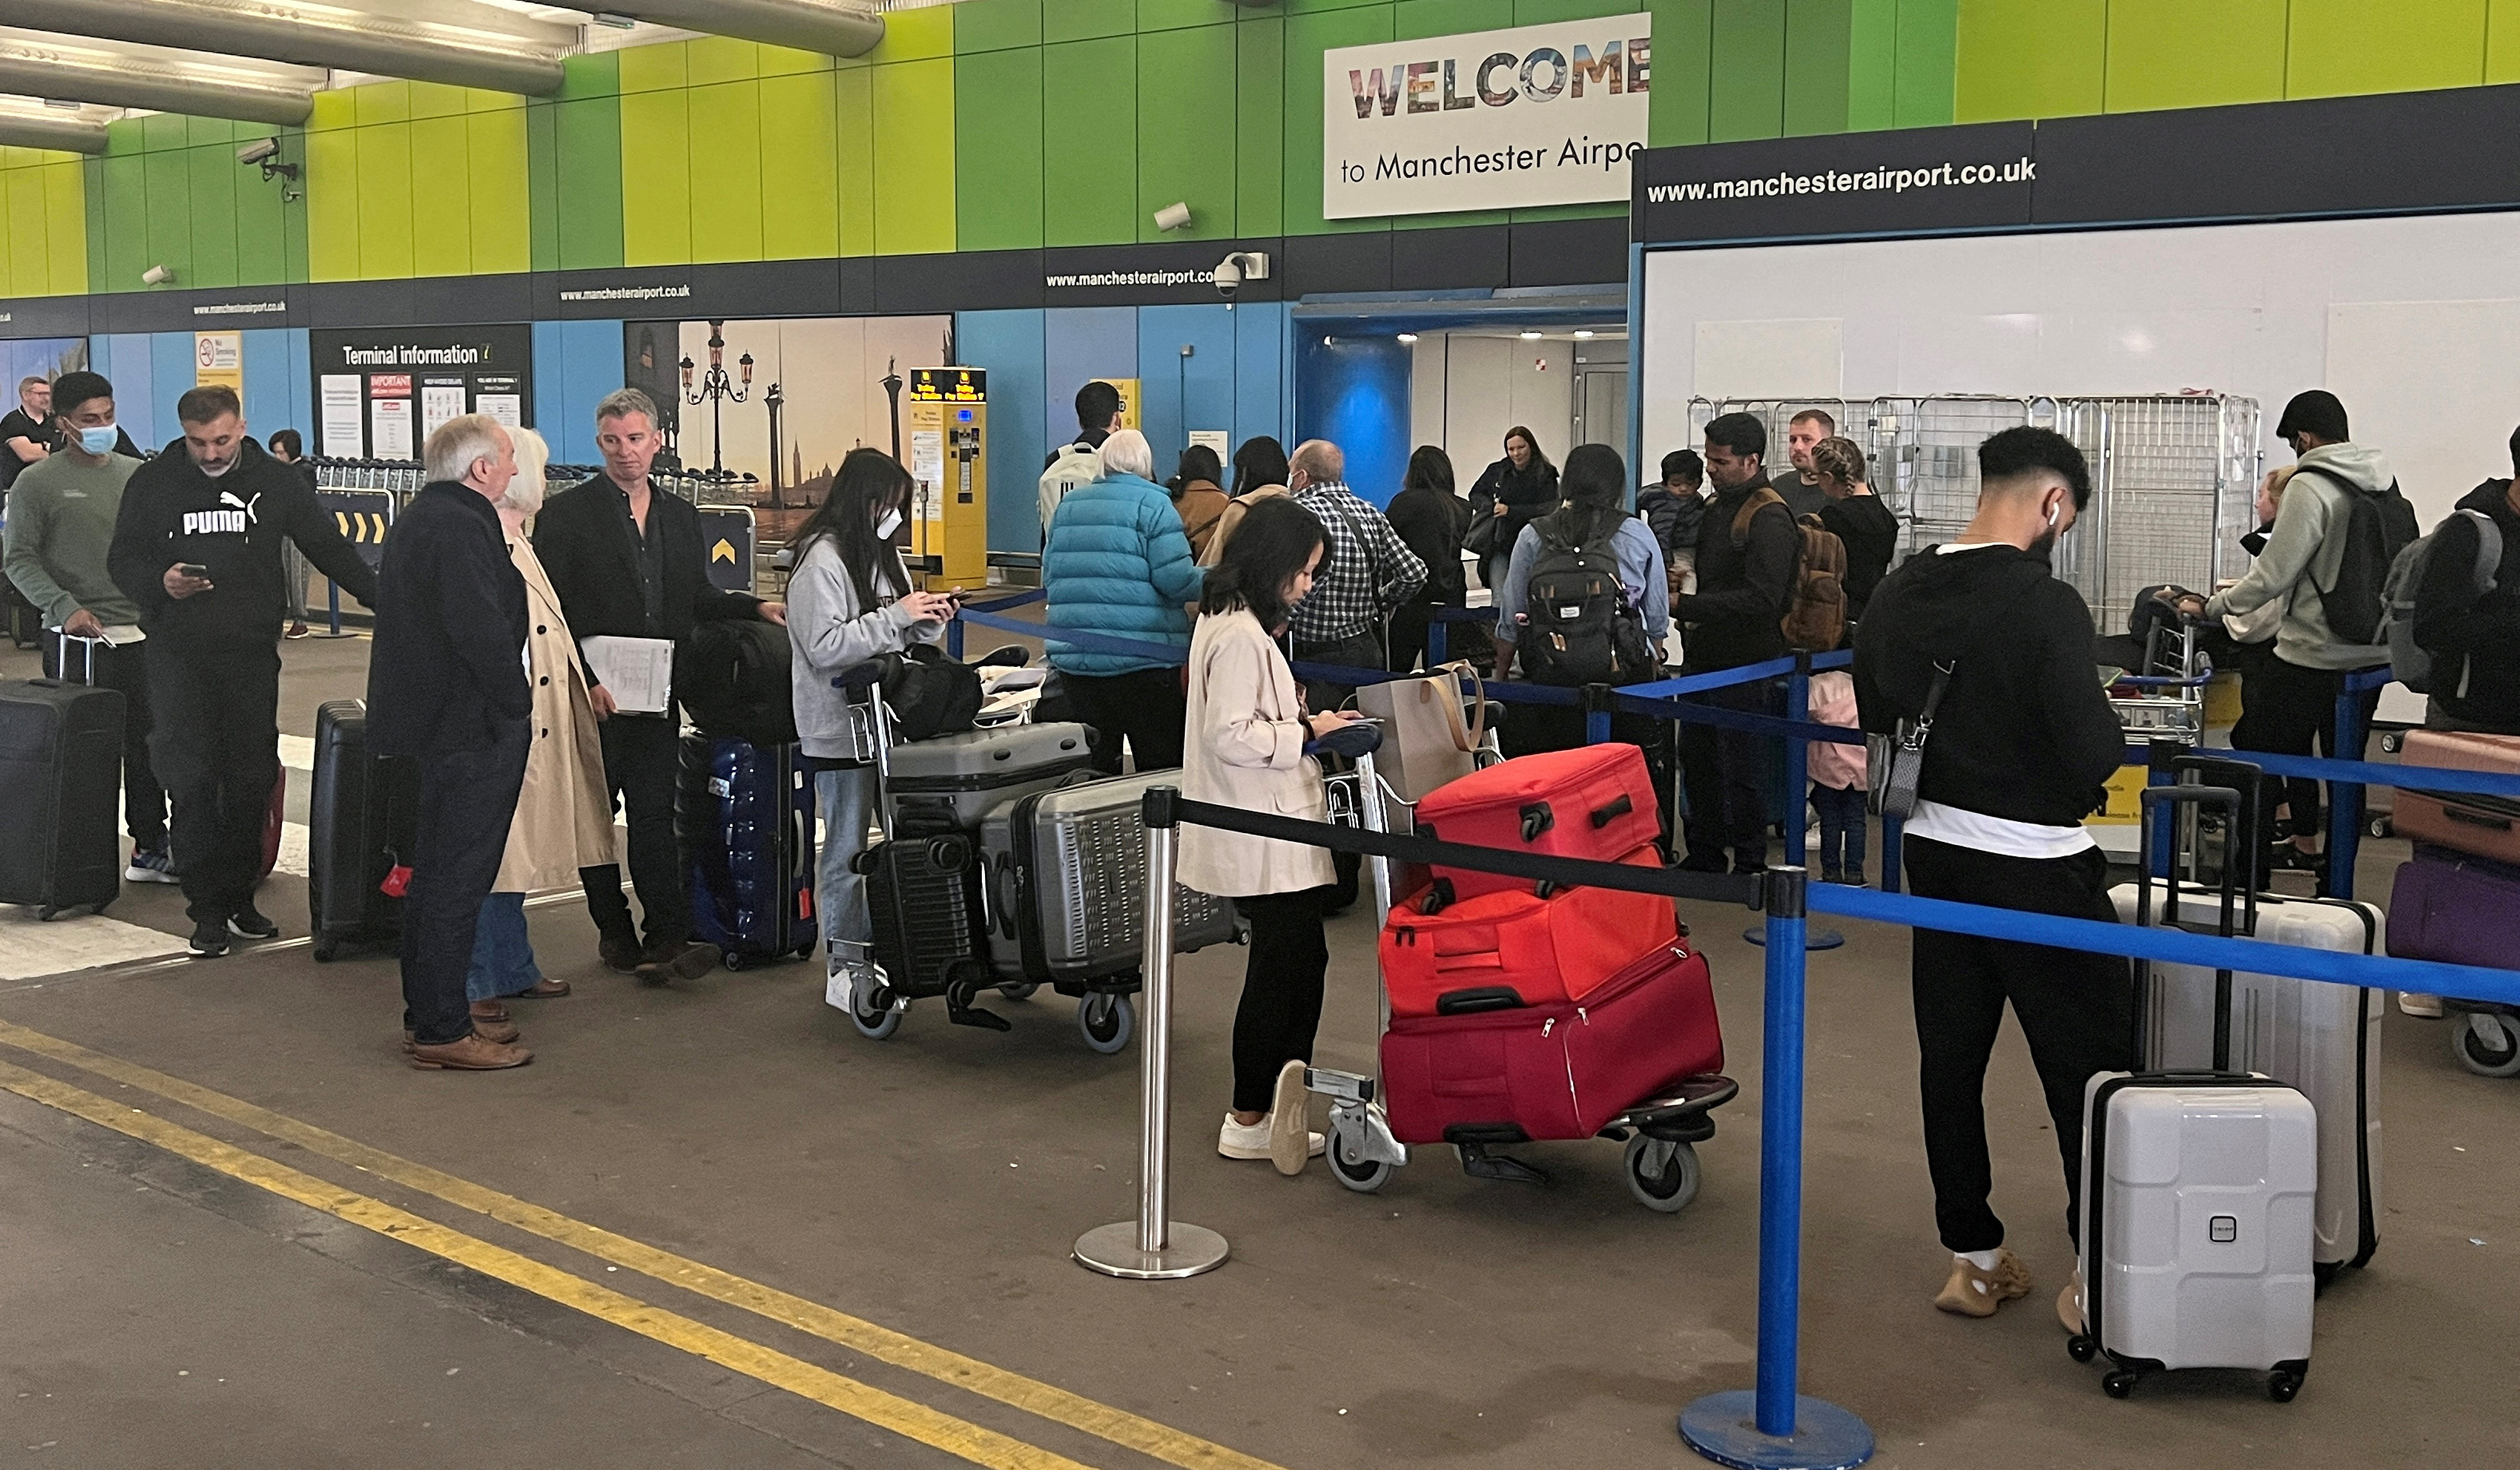 Passengers queue for check in outside Terminal 1 at Manchester Airport